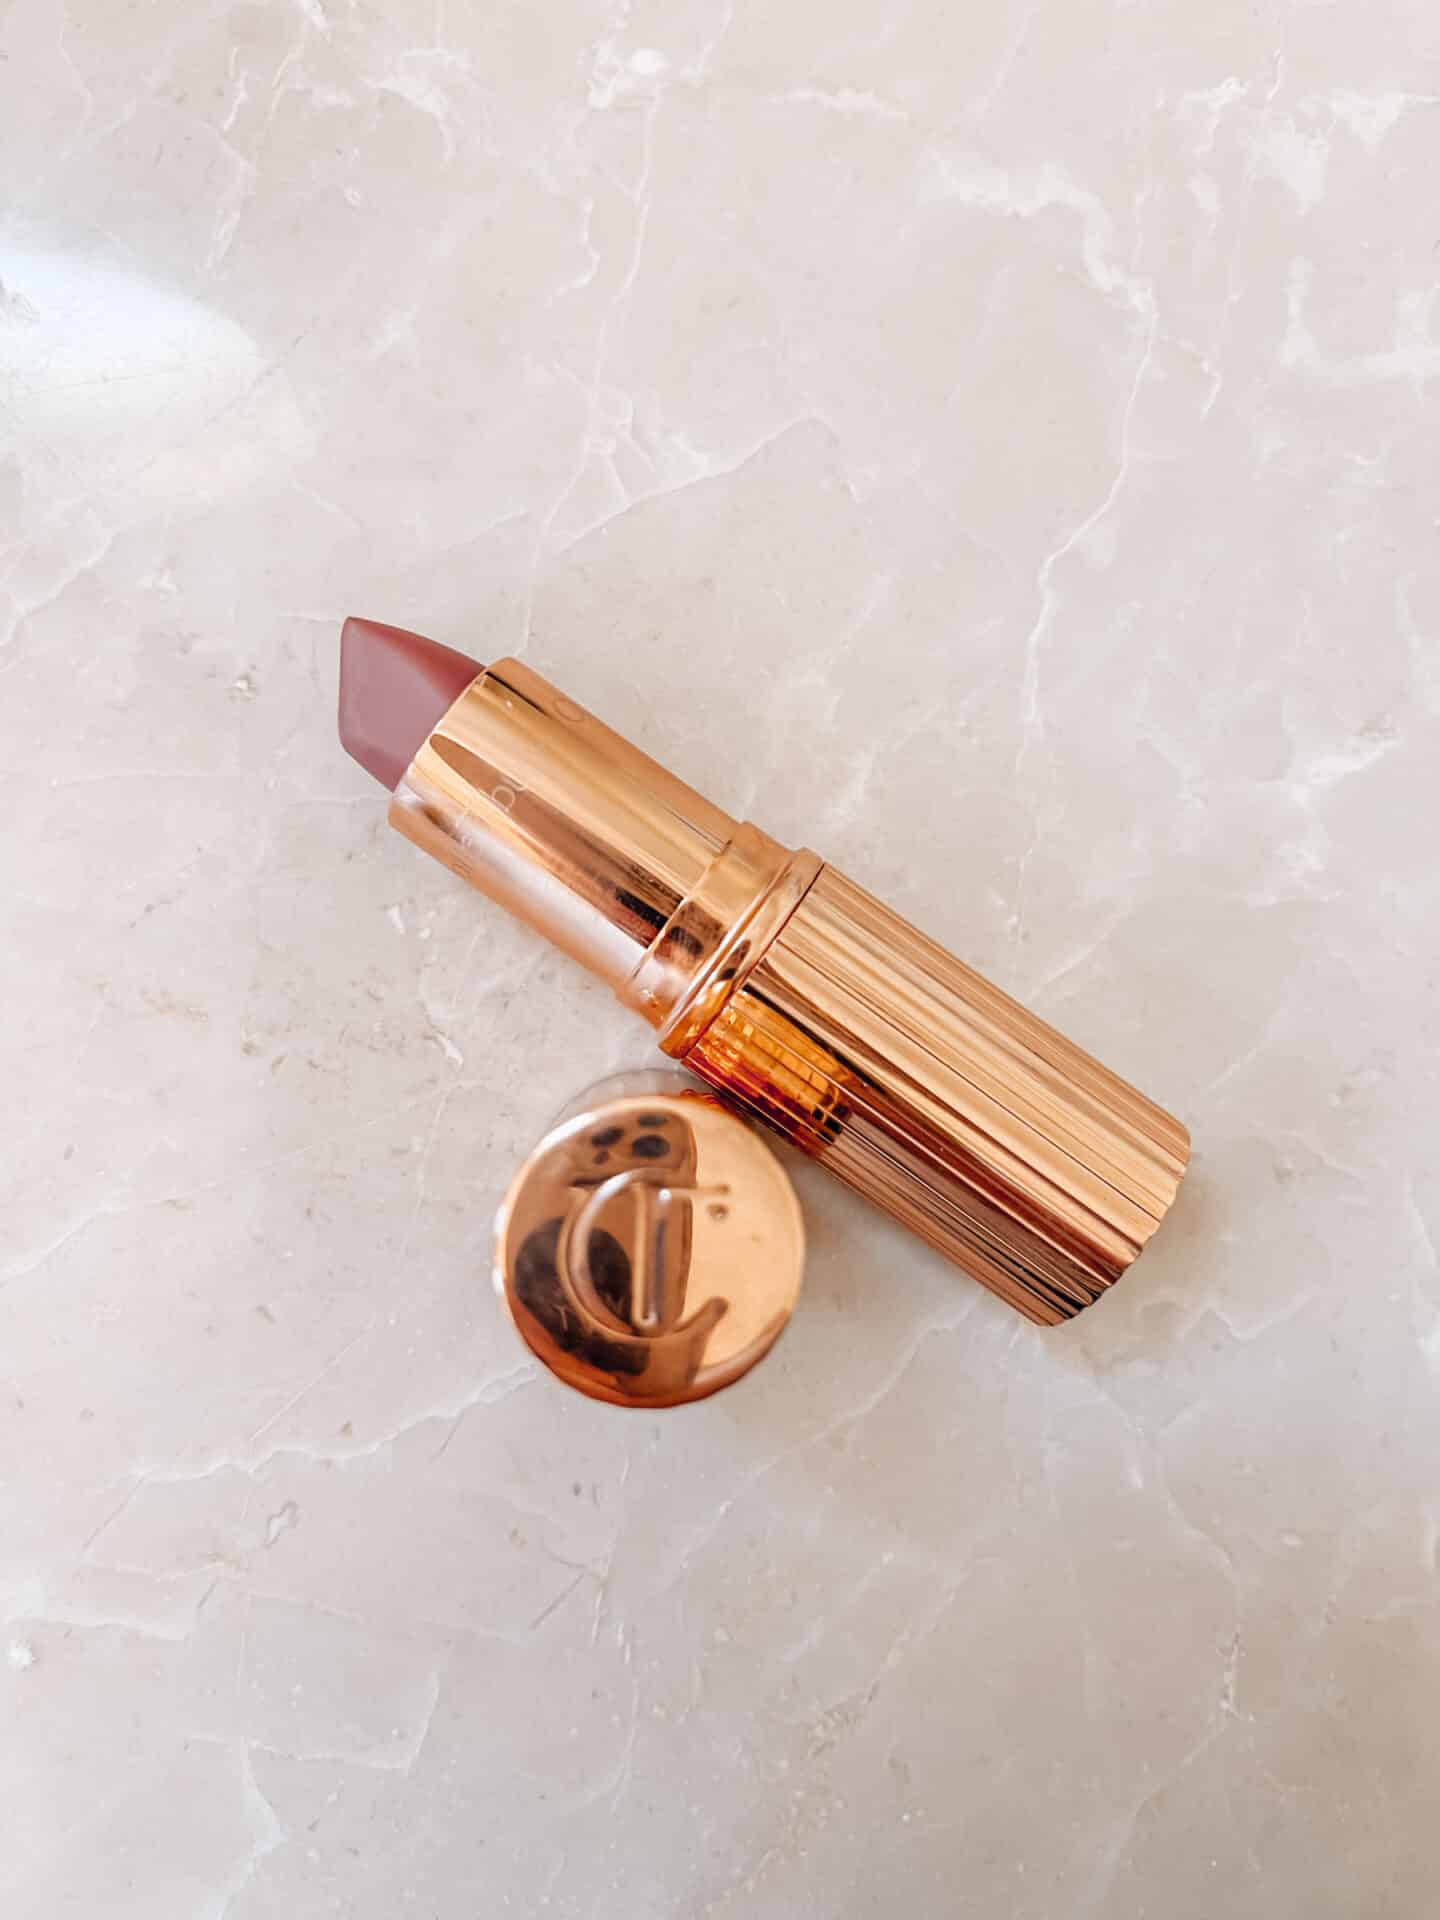 Honest Charlotte Tilbury review, by lifestyle blogger What The Fab